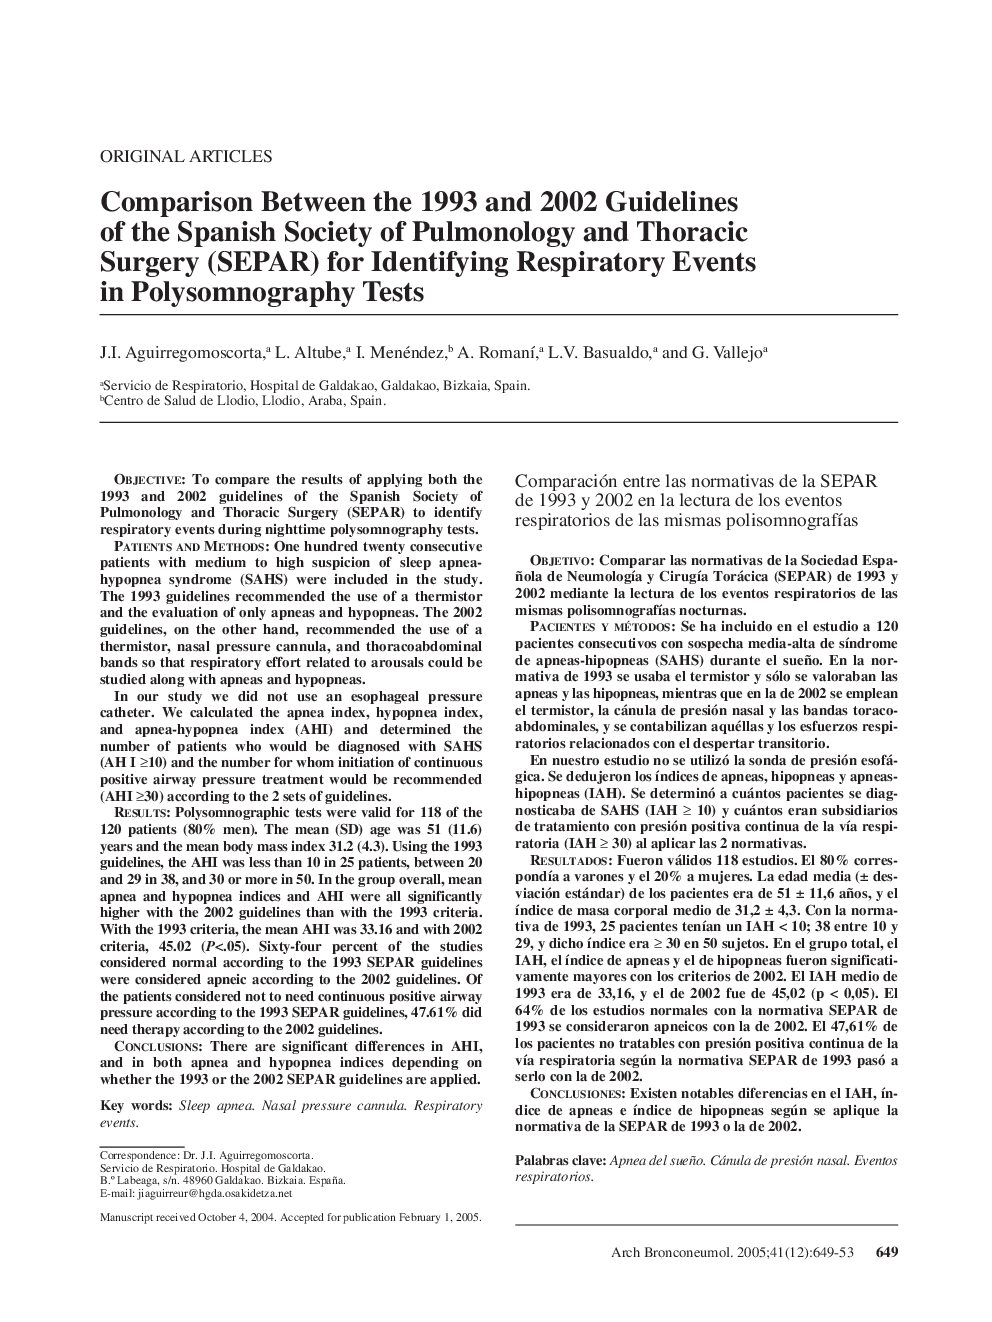 Comparison Between the 1993 and 2002 Guidelines of the Spanish Society of Pulmonology and Thoracic Surgery (SEPAR) for Identifying Respiratory Events in Polysomnography Tests